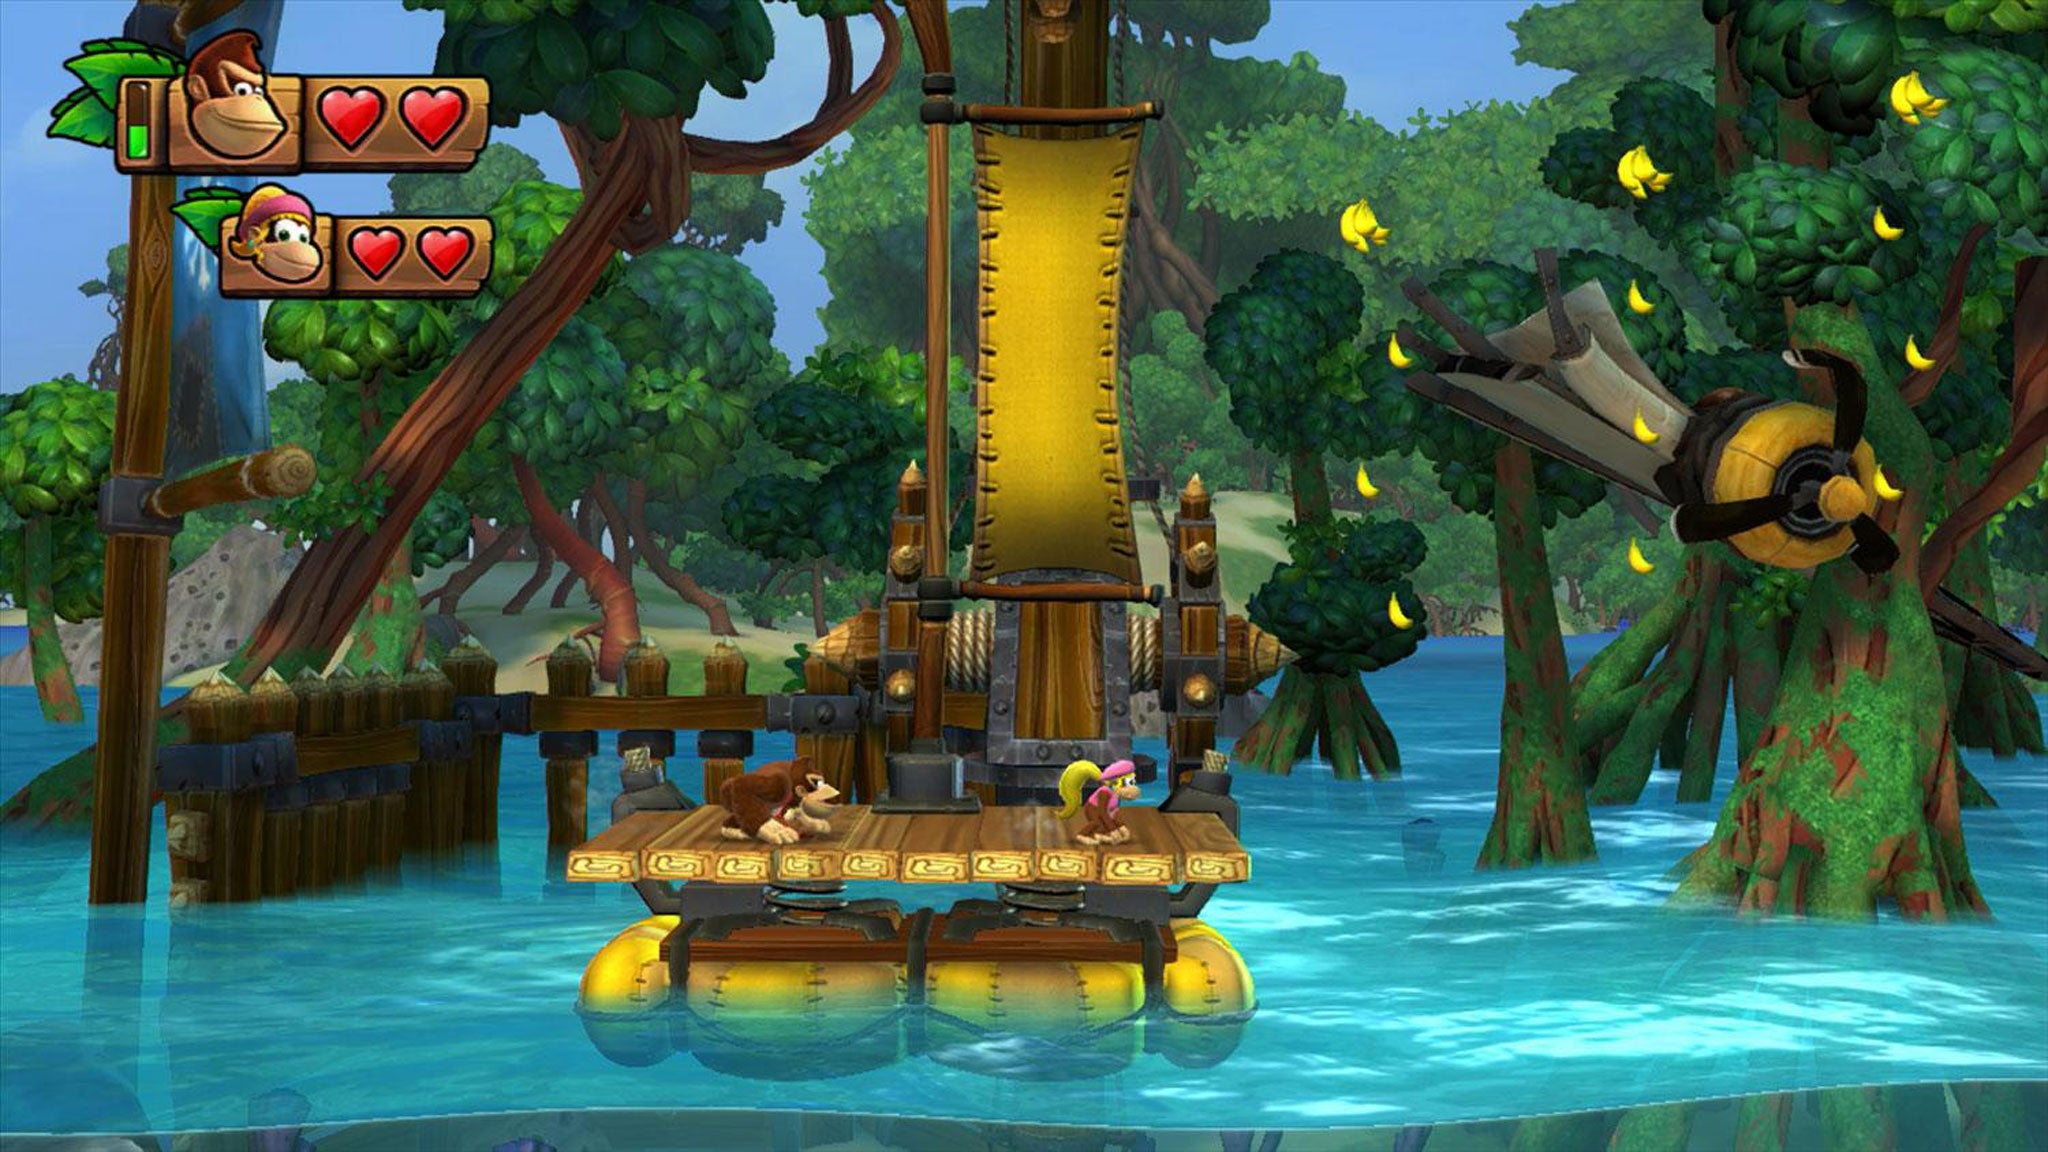 Donkey Kong Country: Tropical Freeze is hugely enjoyable